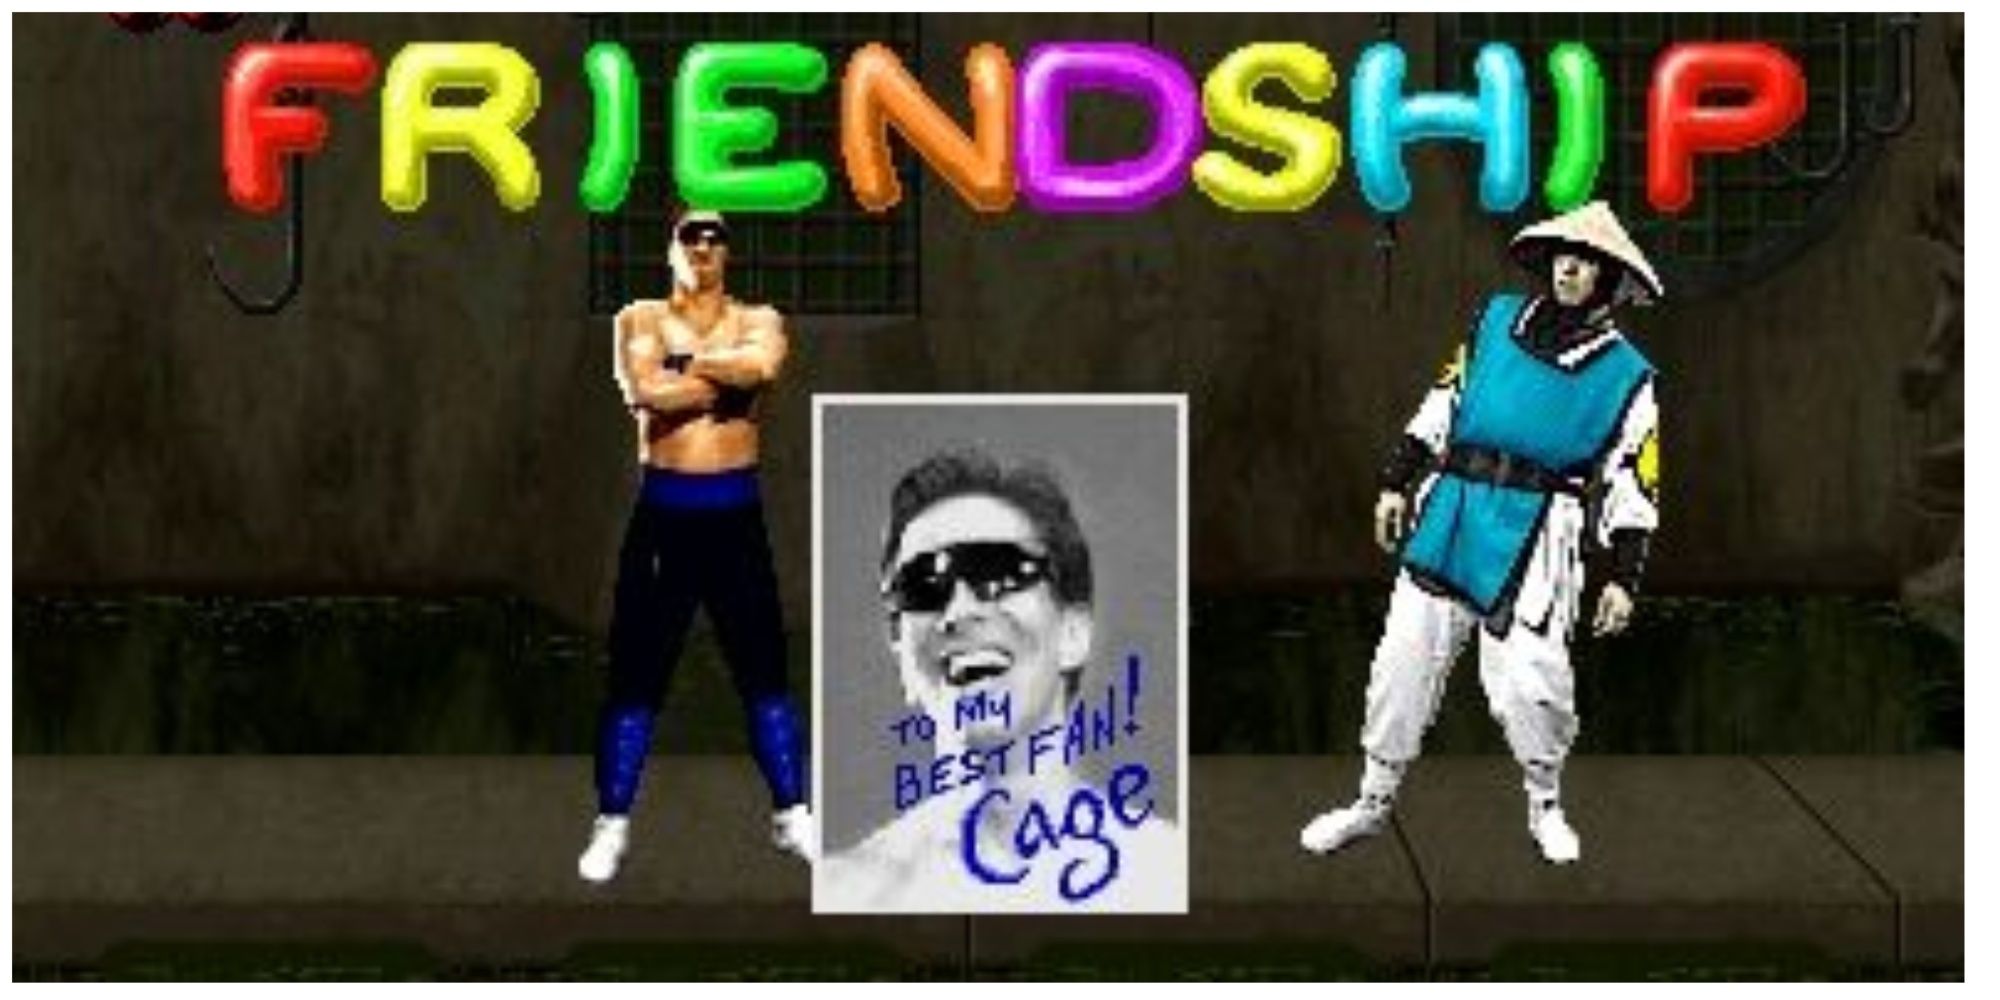 Johnny Cage Friendship: Autograph gifted to player reading "To My Best Fan! Cage"